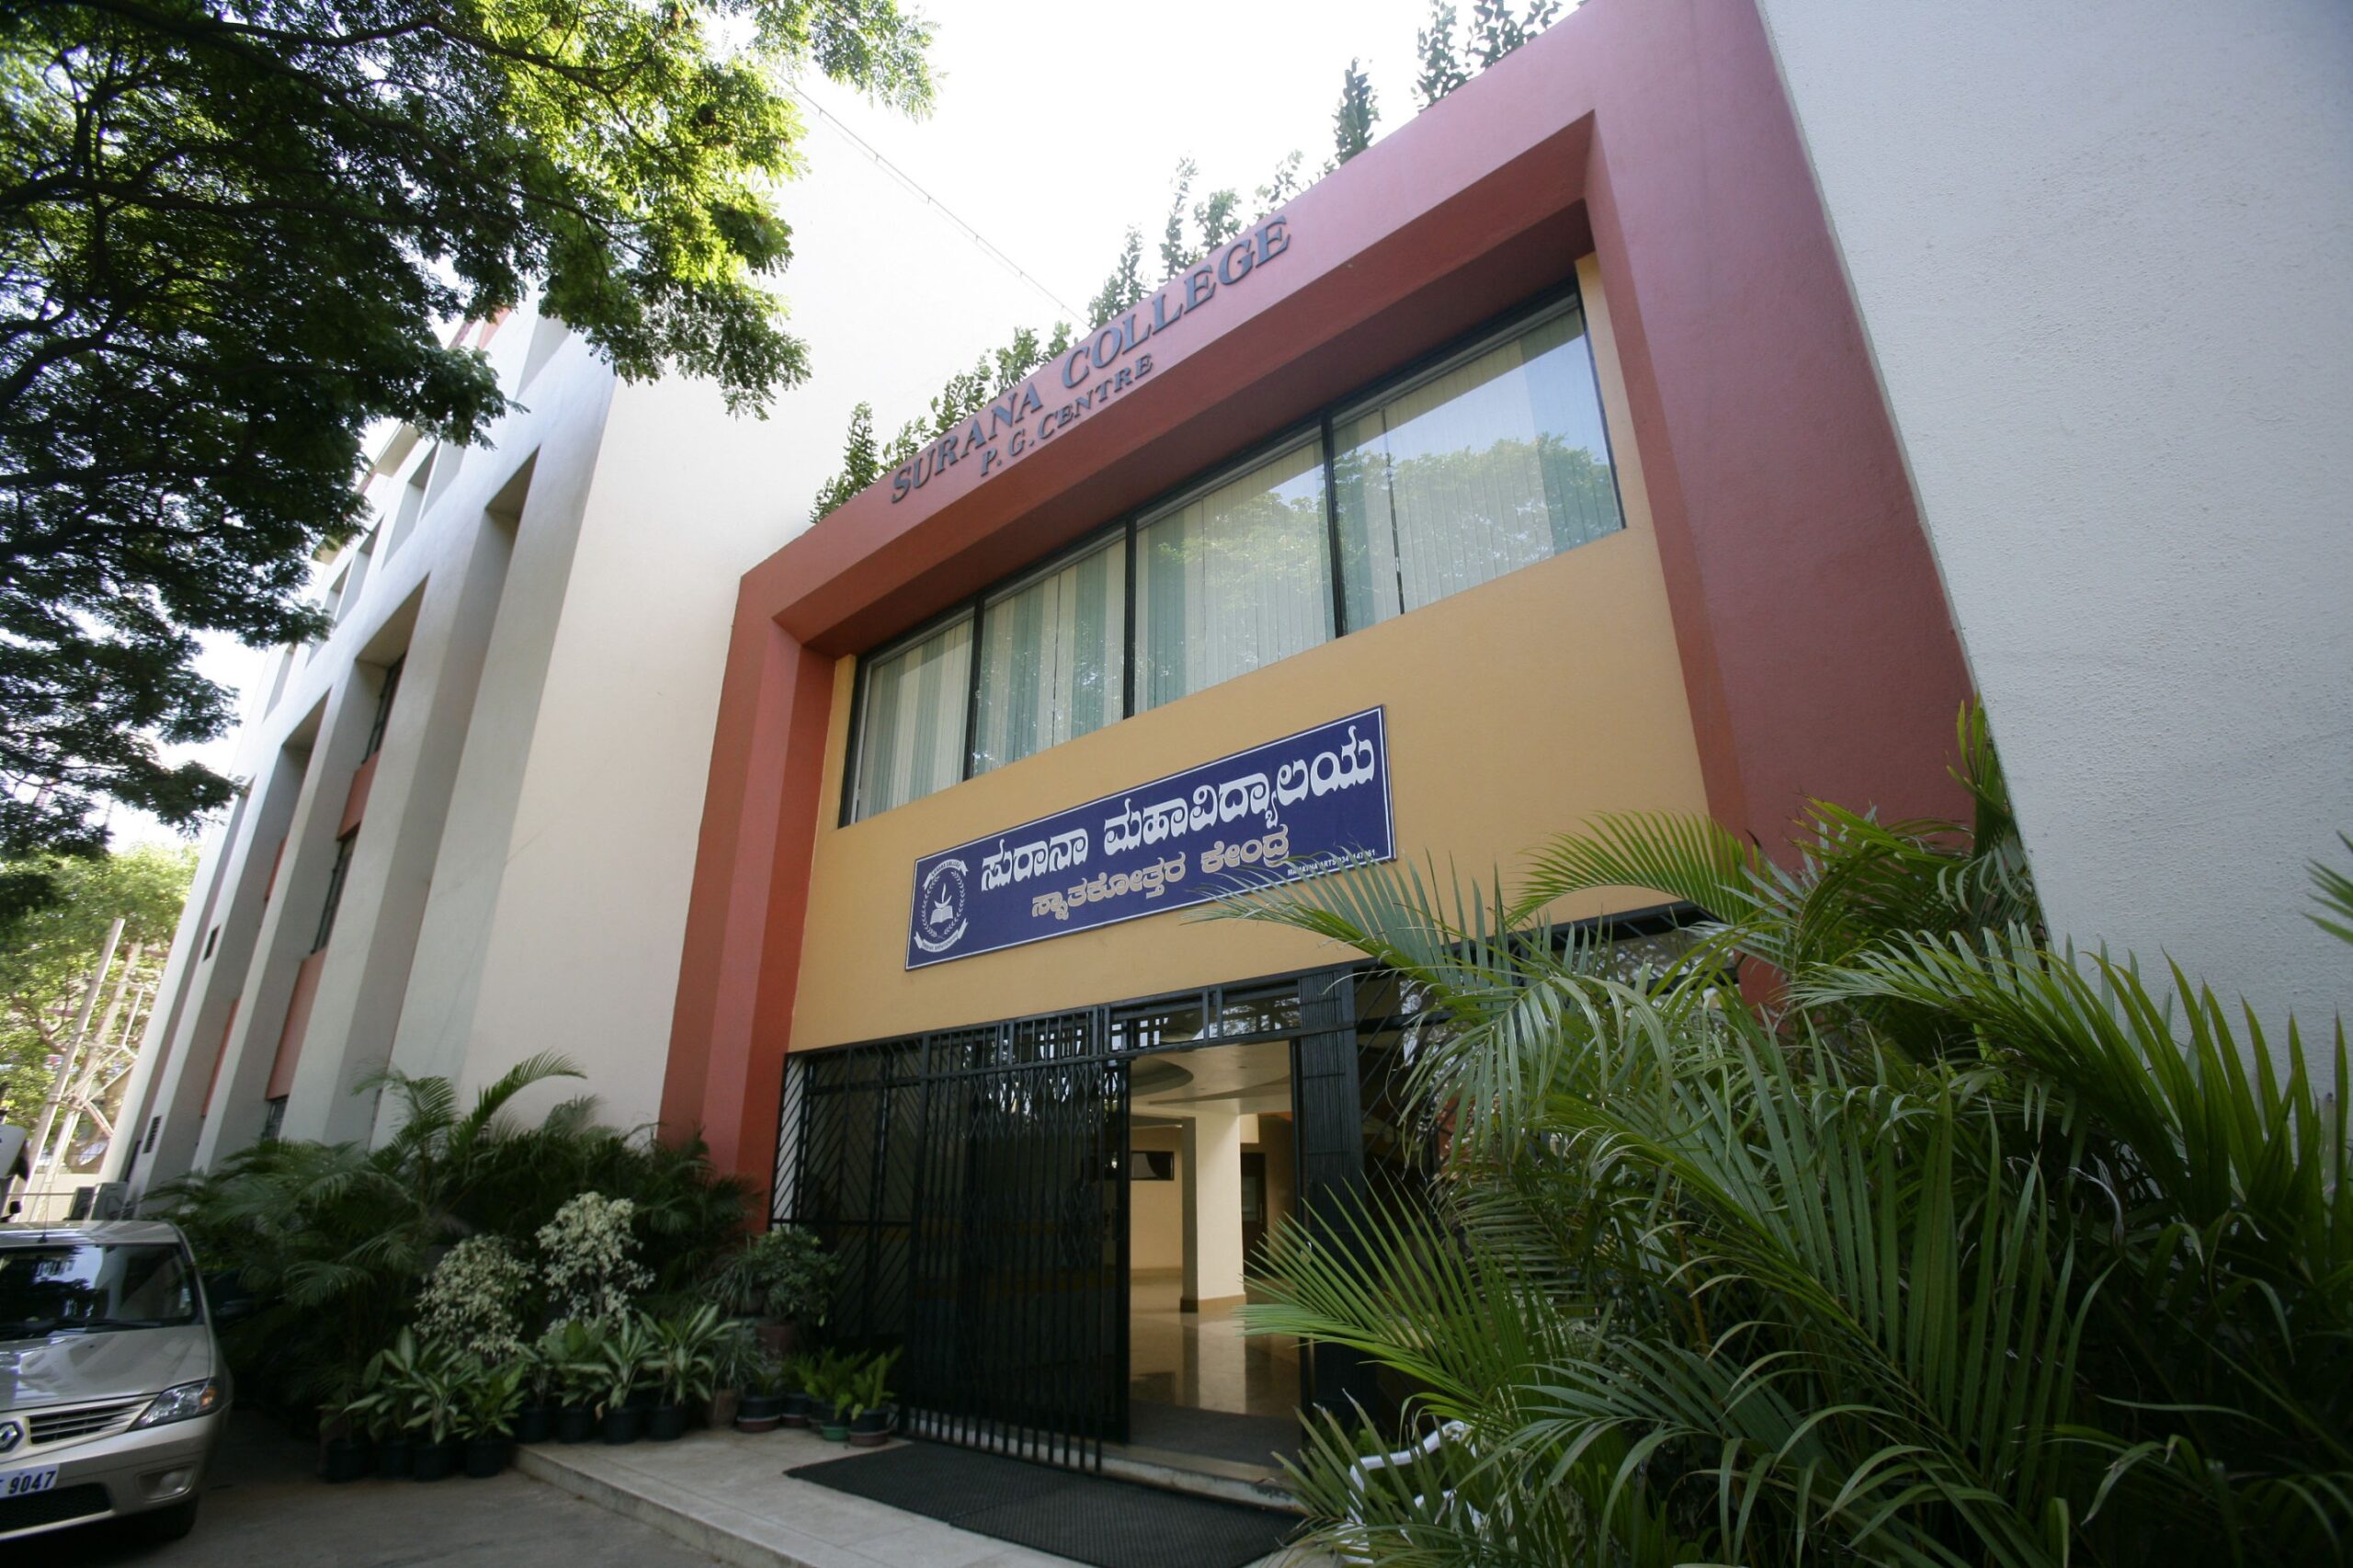 Surana College Bangalore Admission, Courses, Fees, Placements, Rankings